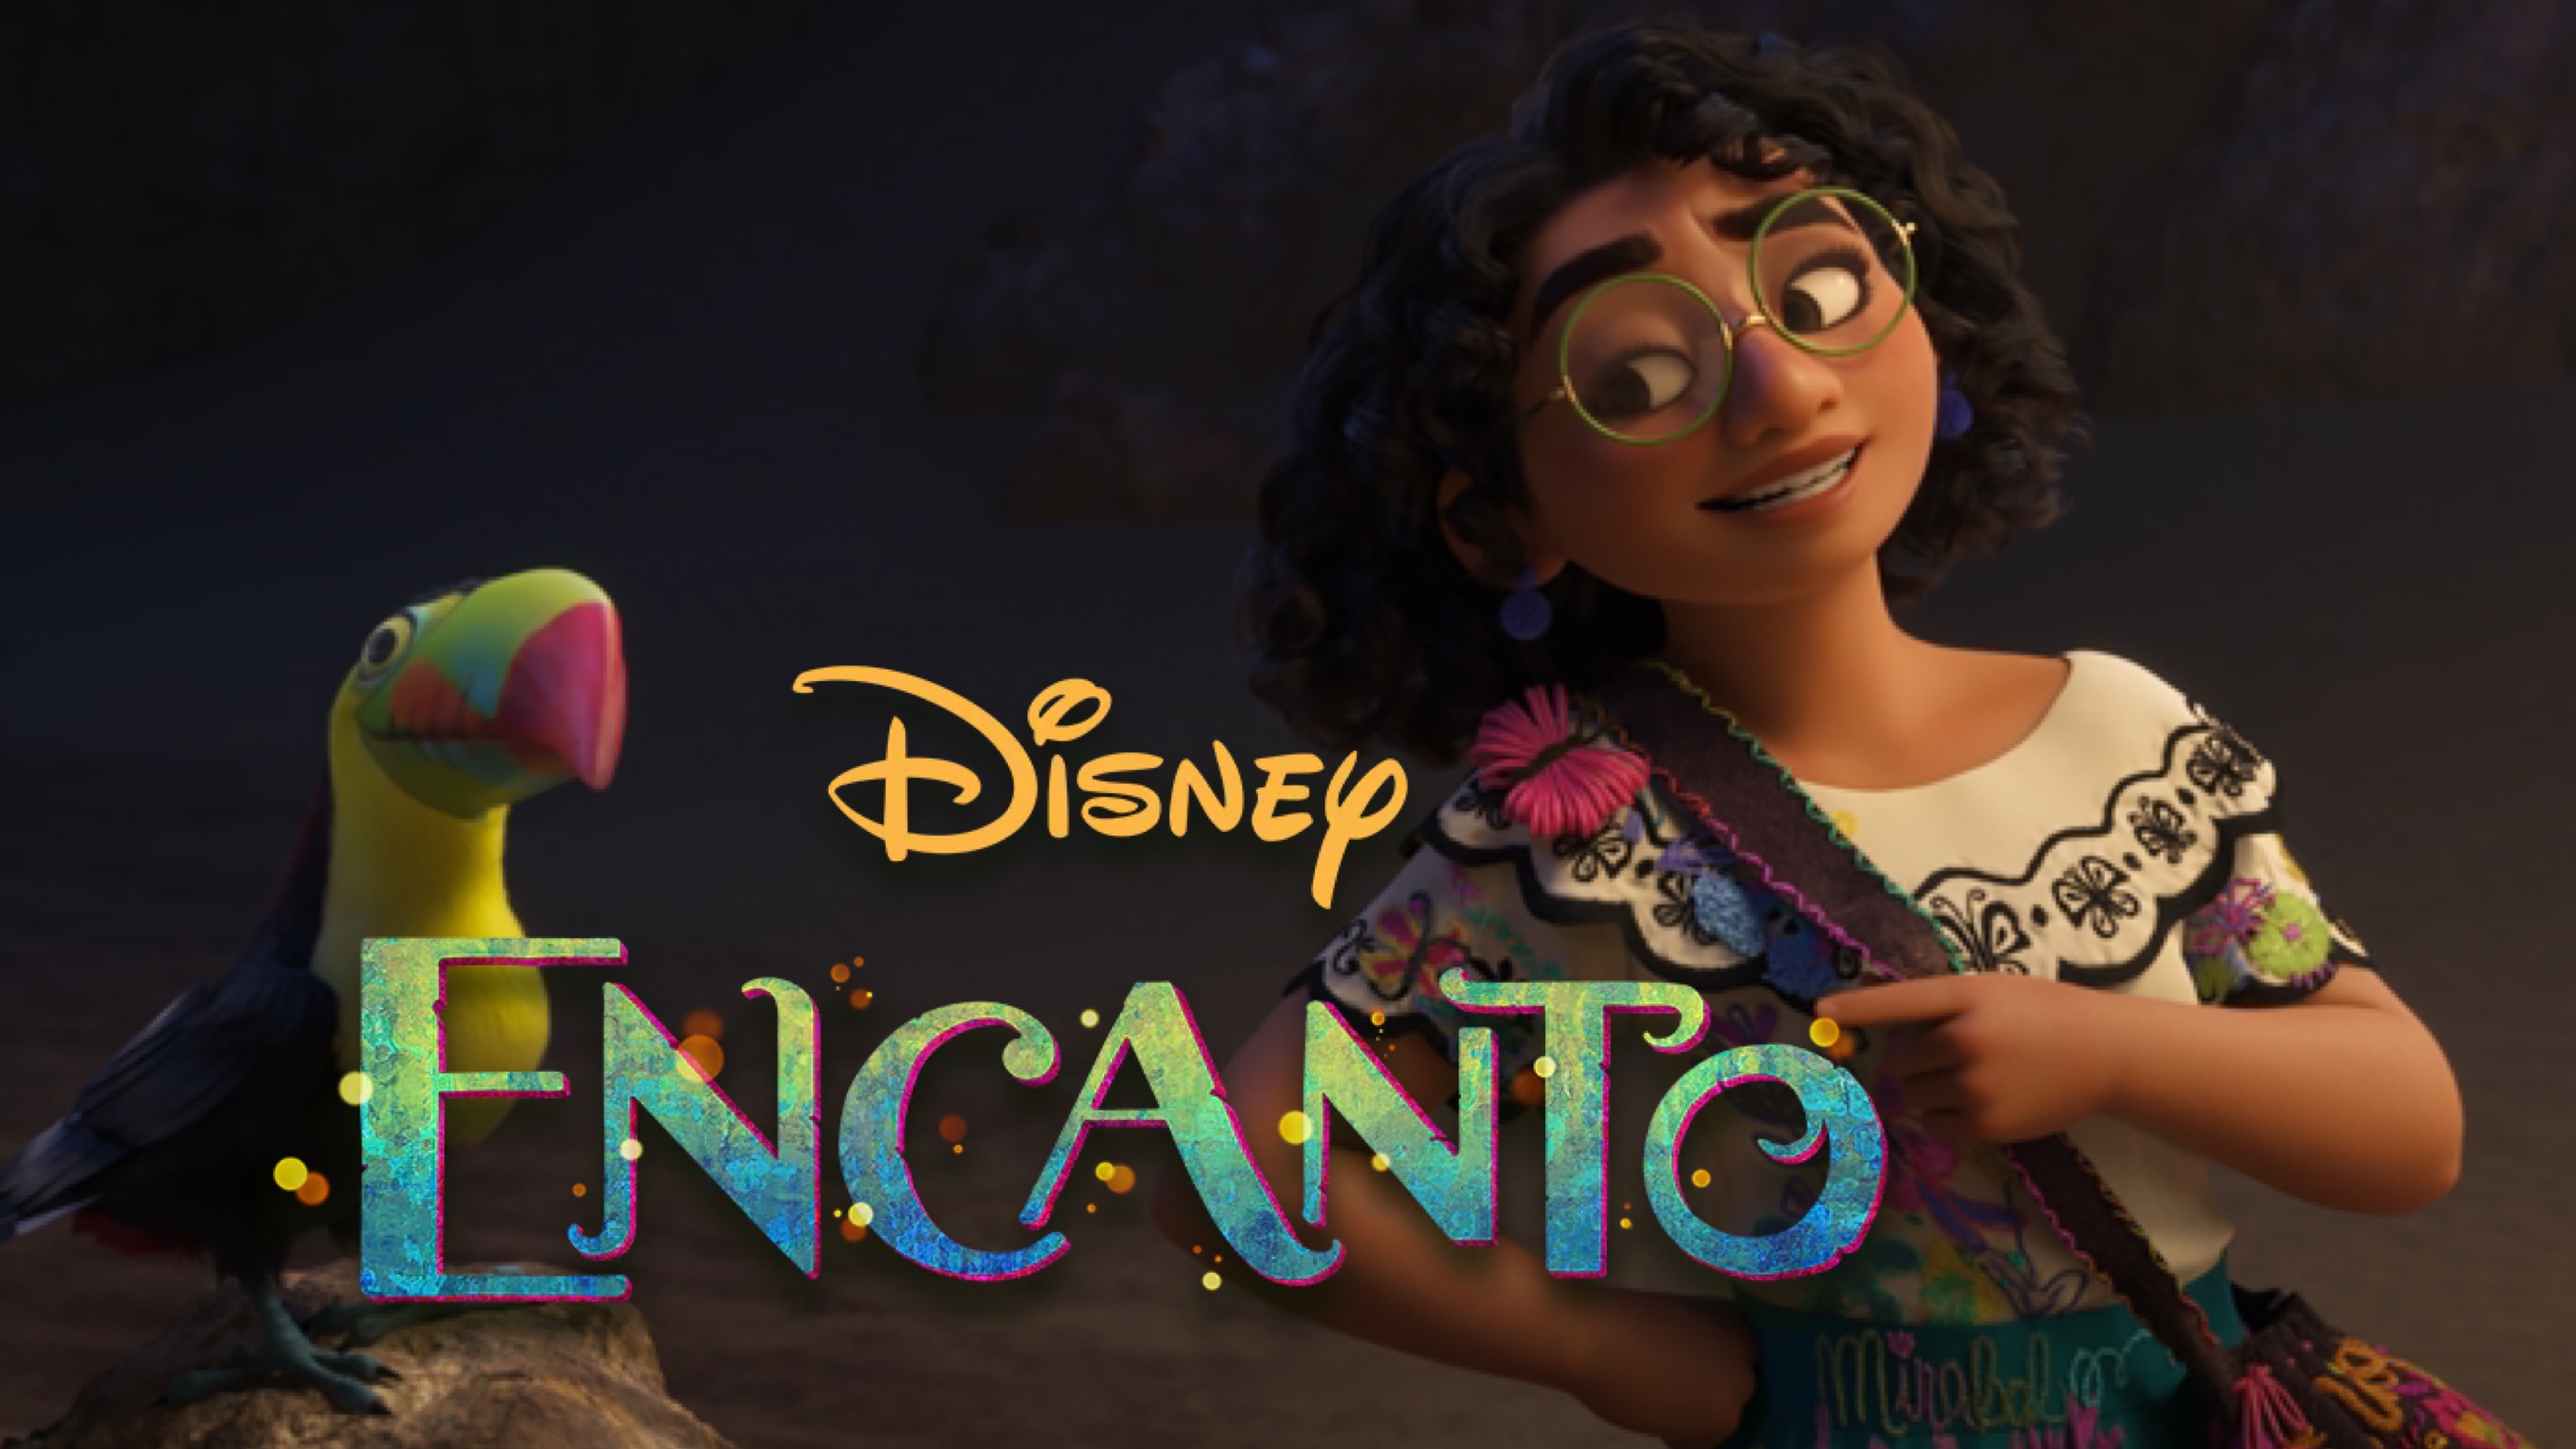 Maribel and a Toucan Are Front and Center in New ‘Encanto’ Image